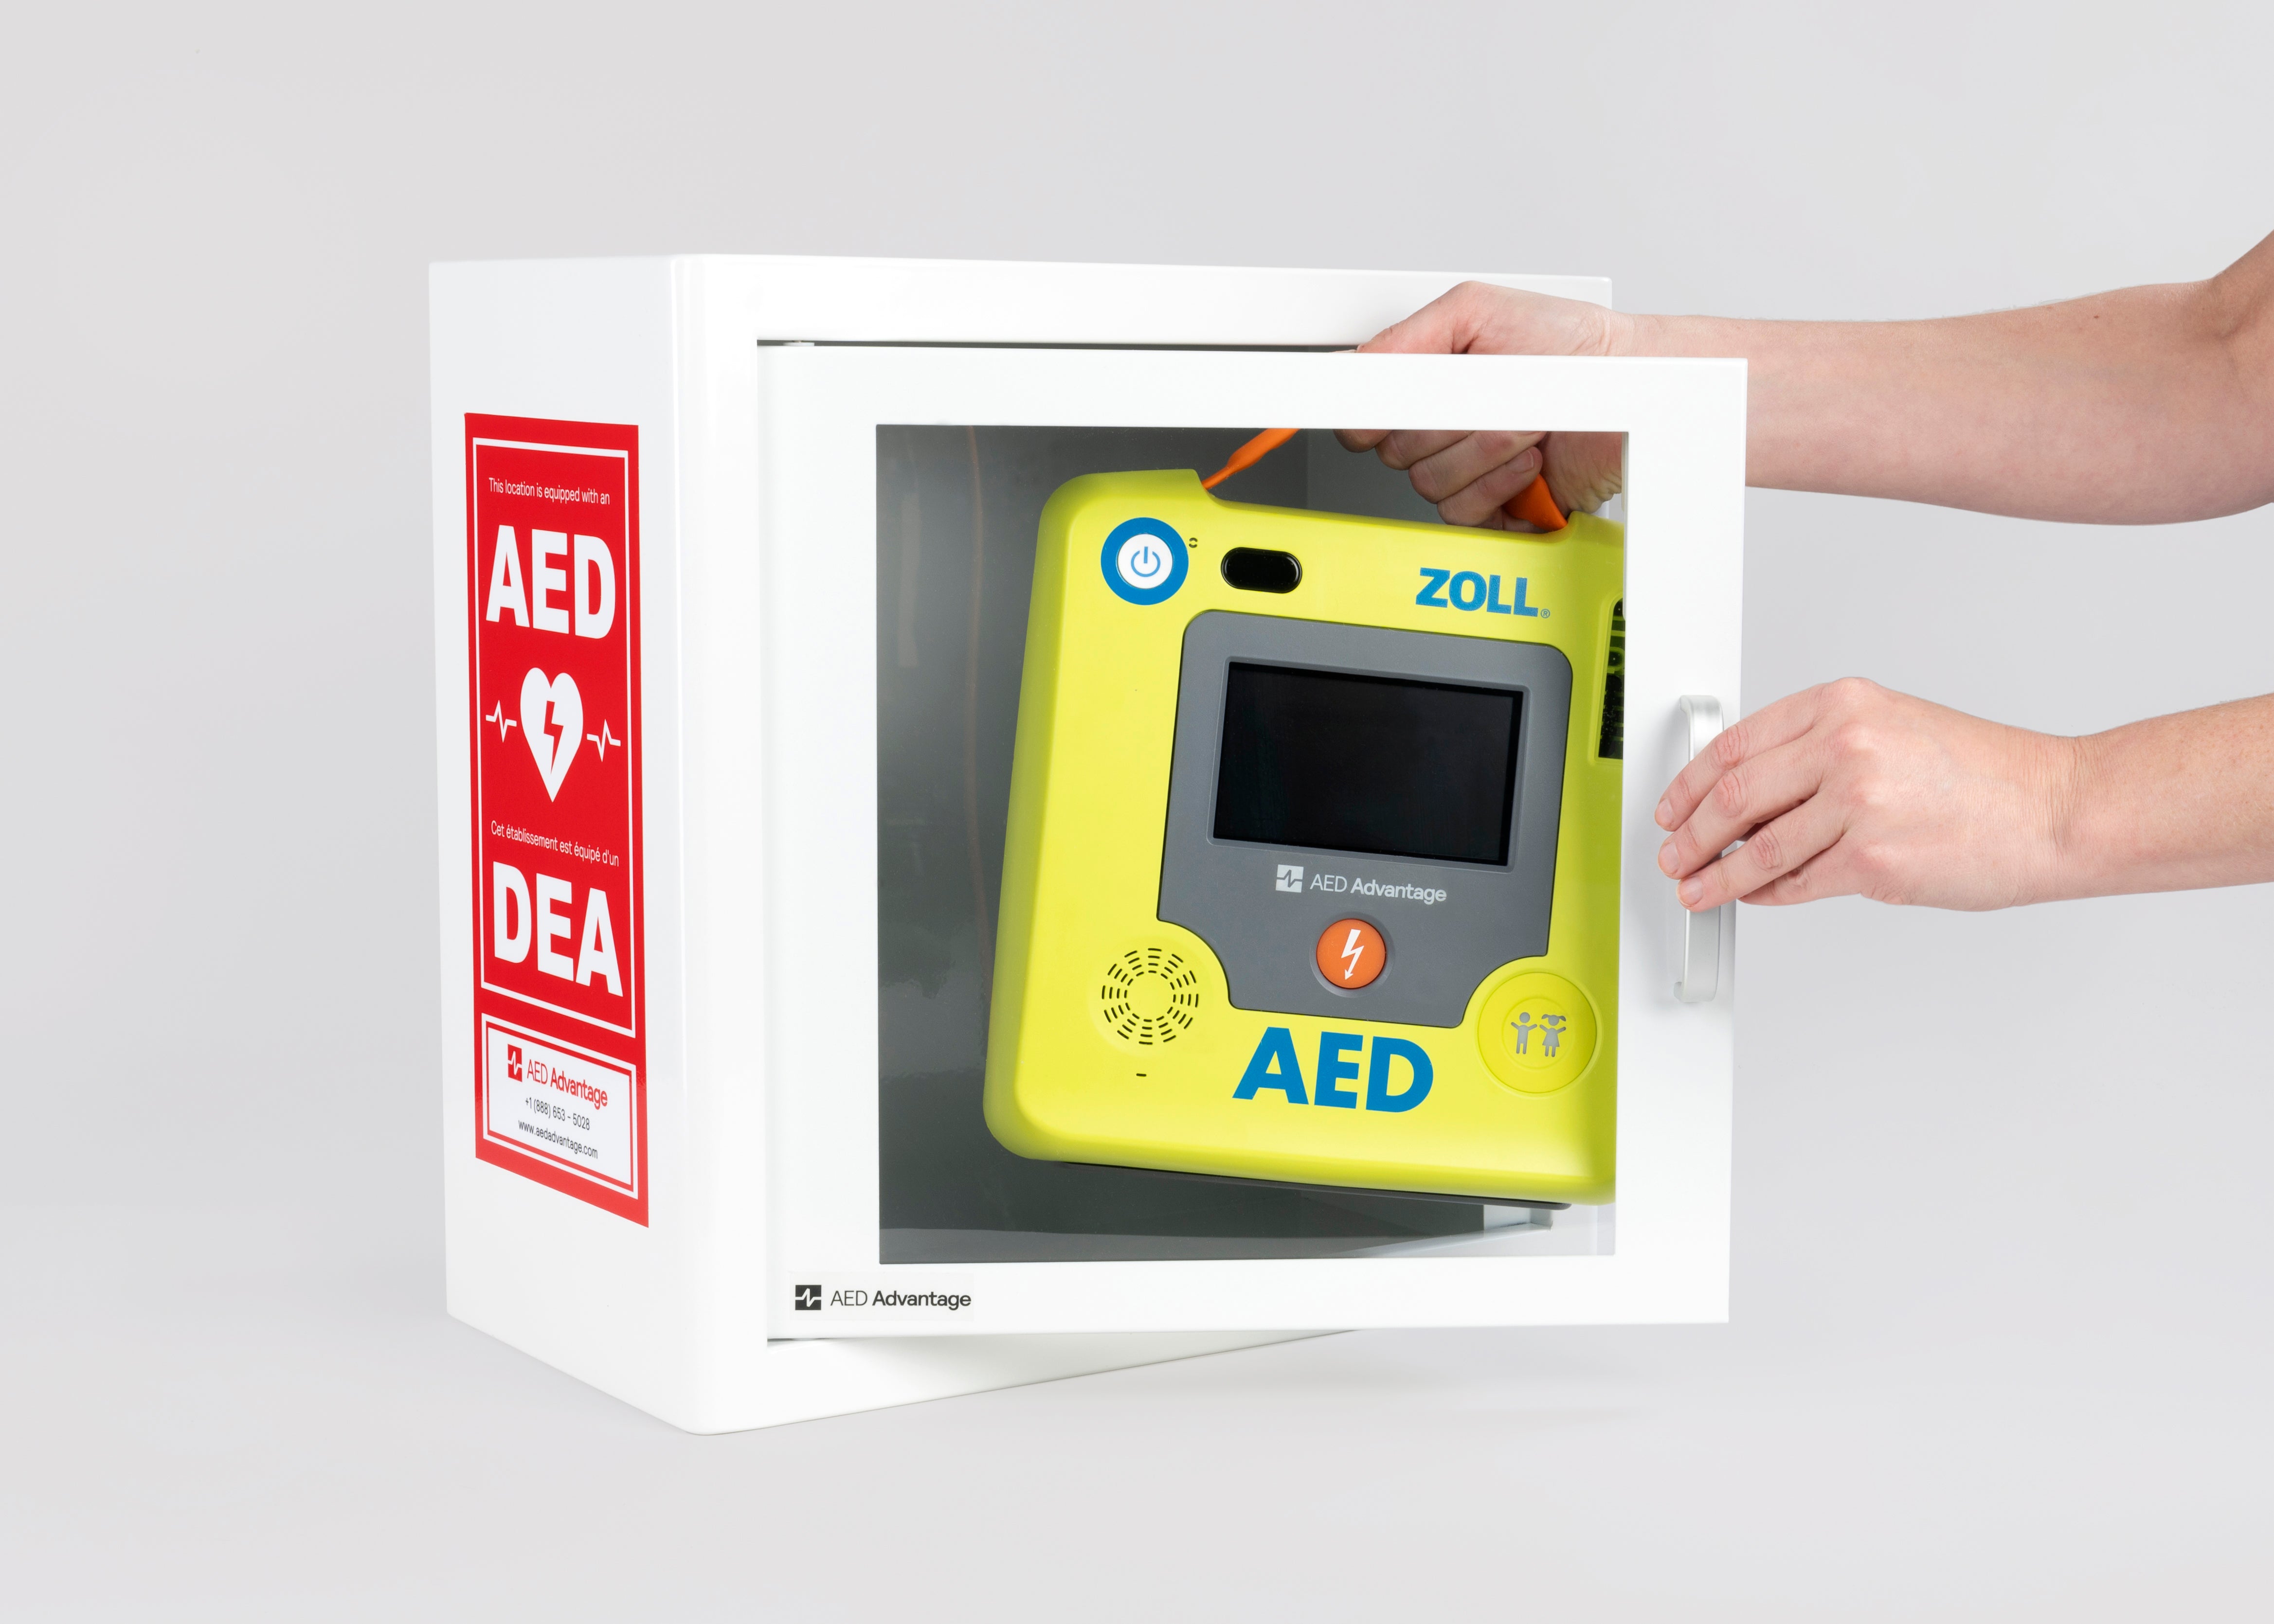 A green ZOLL AED 3 machine being retrieved by hand from a white metal cabinet with red decals